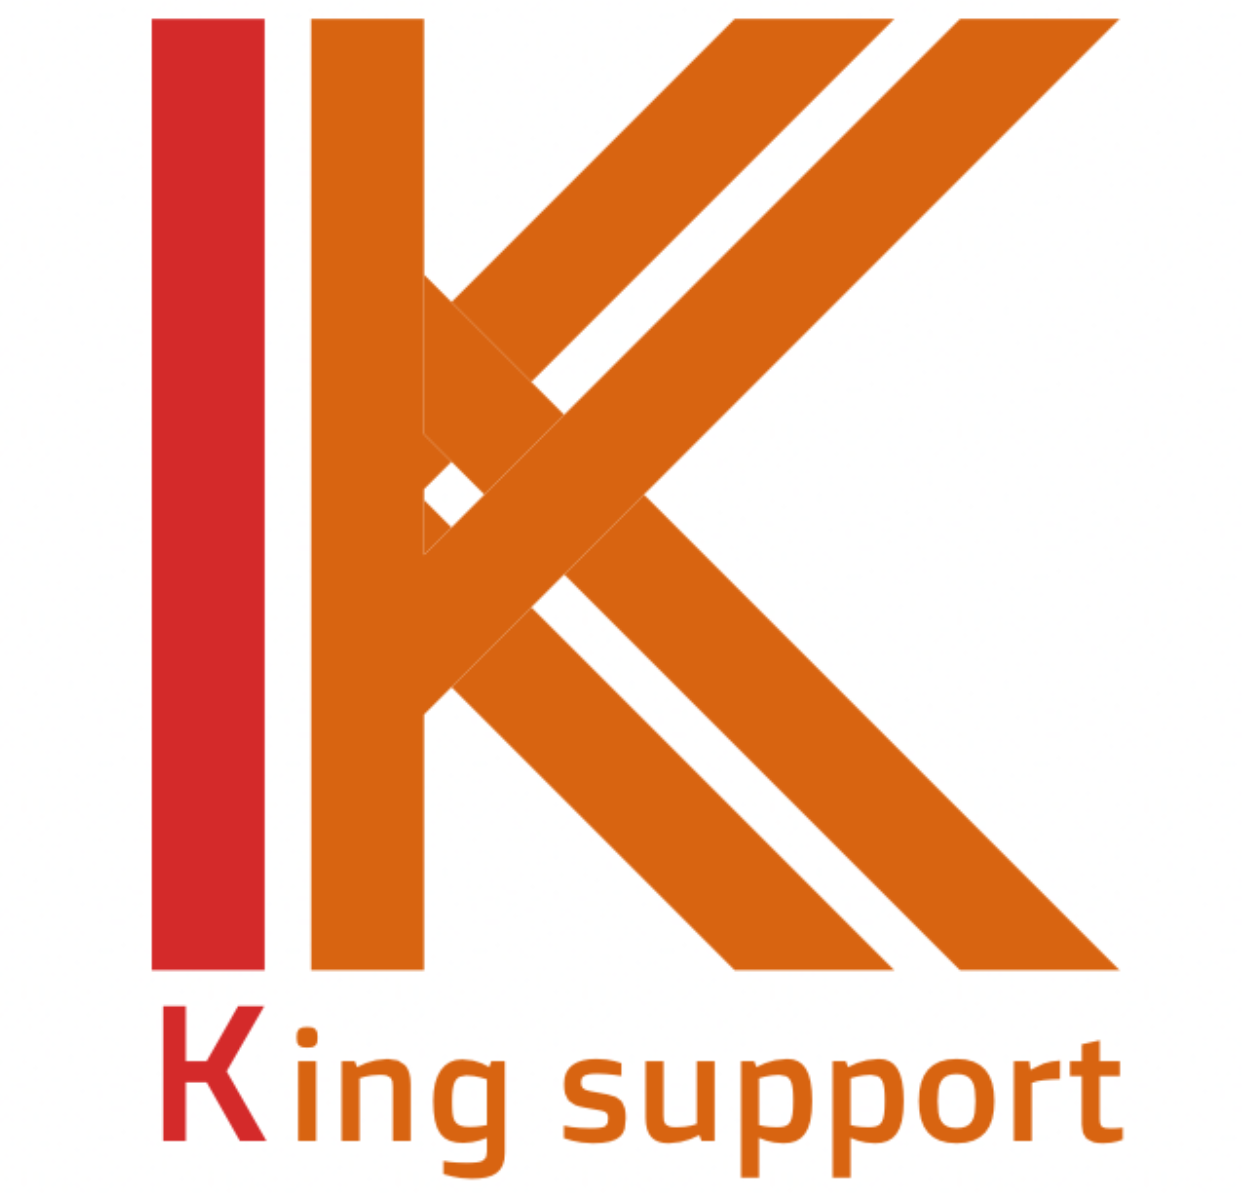 King support